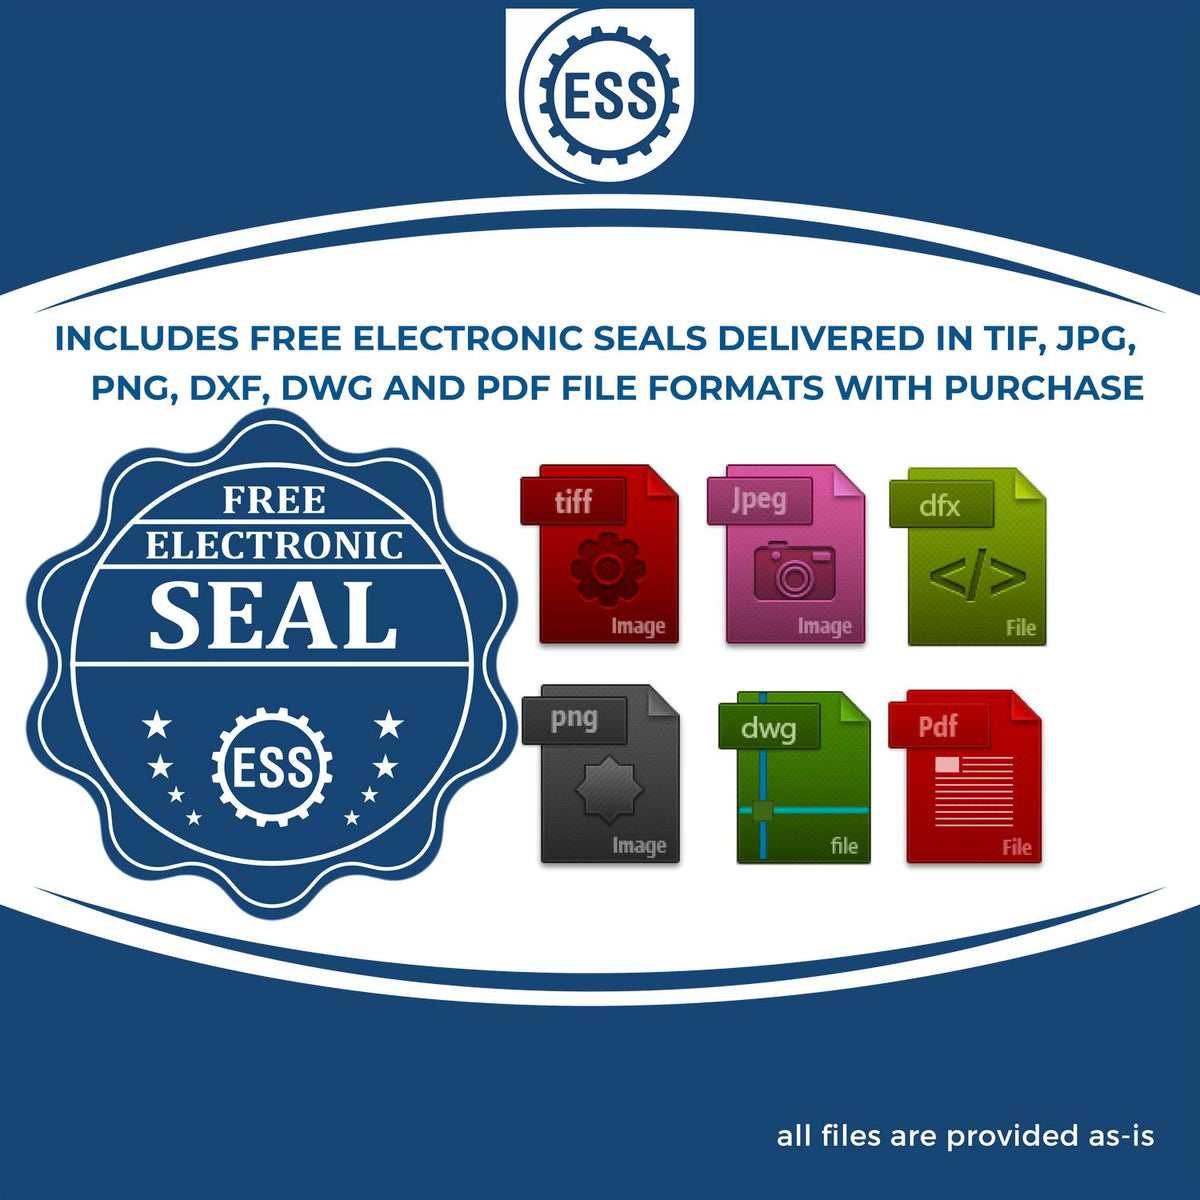 An infographic for the free electronic seal for the State of New Jersey Extended Long Reach Geologist Seal illustrating the different file type icons such as DXF, DWG, TIF, JPG and PNG.